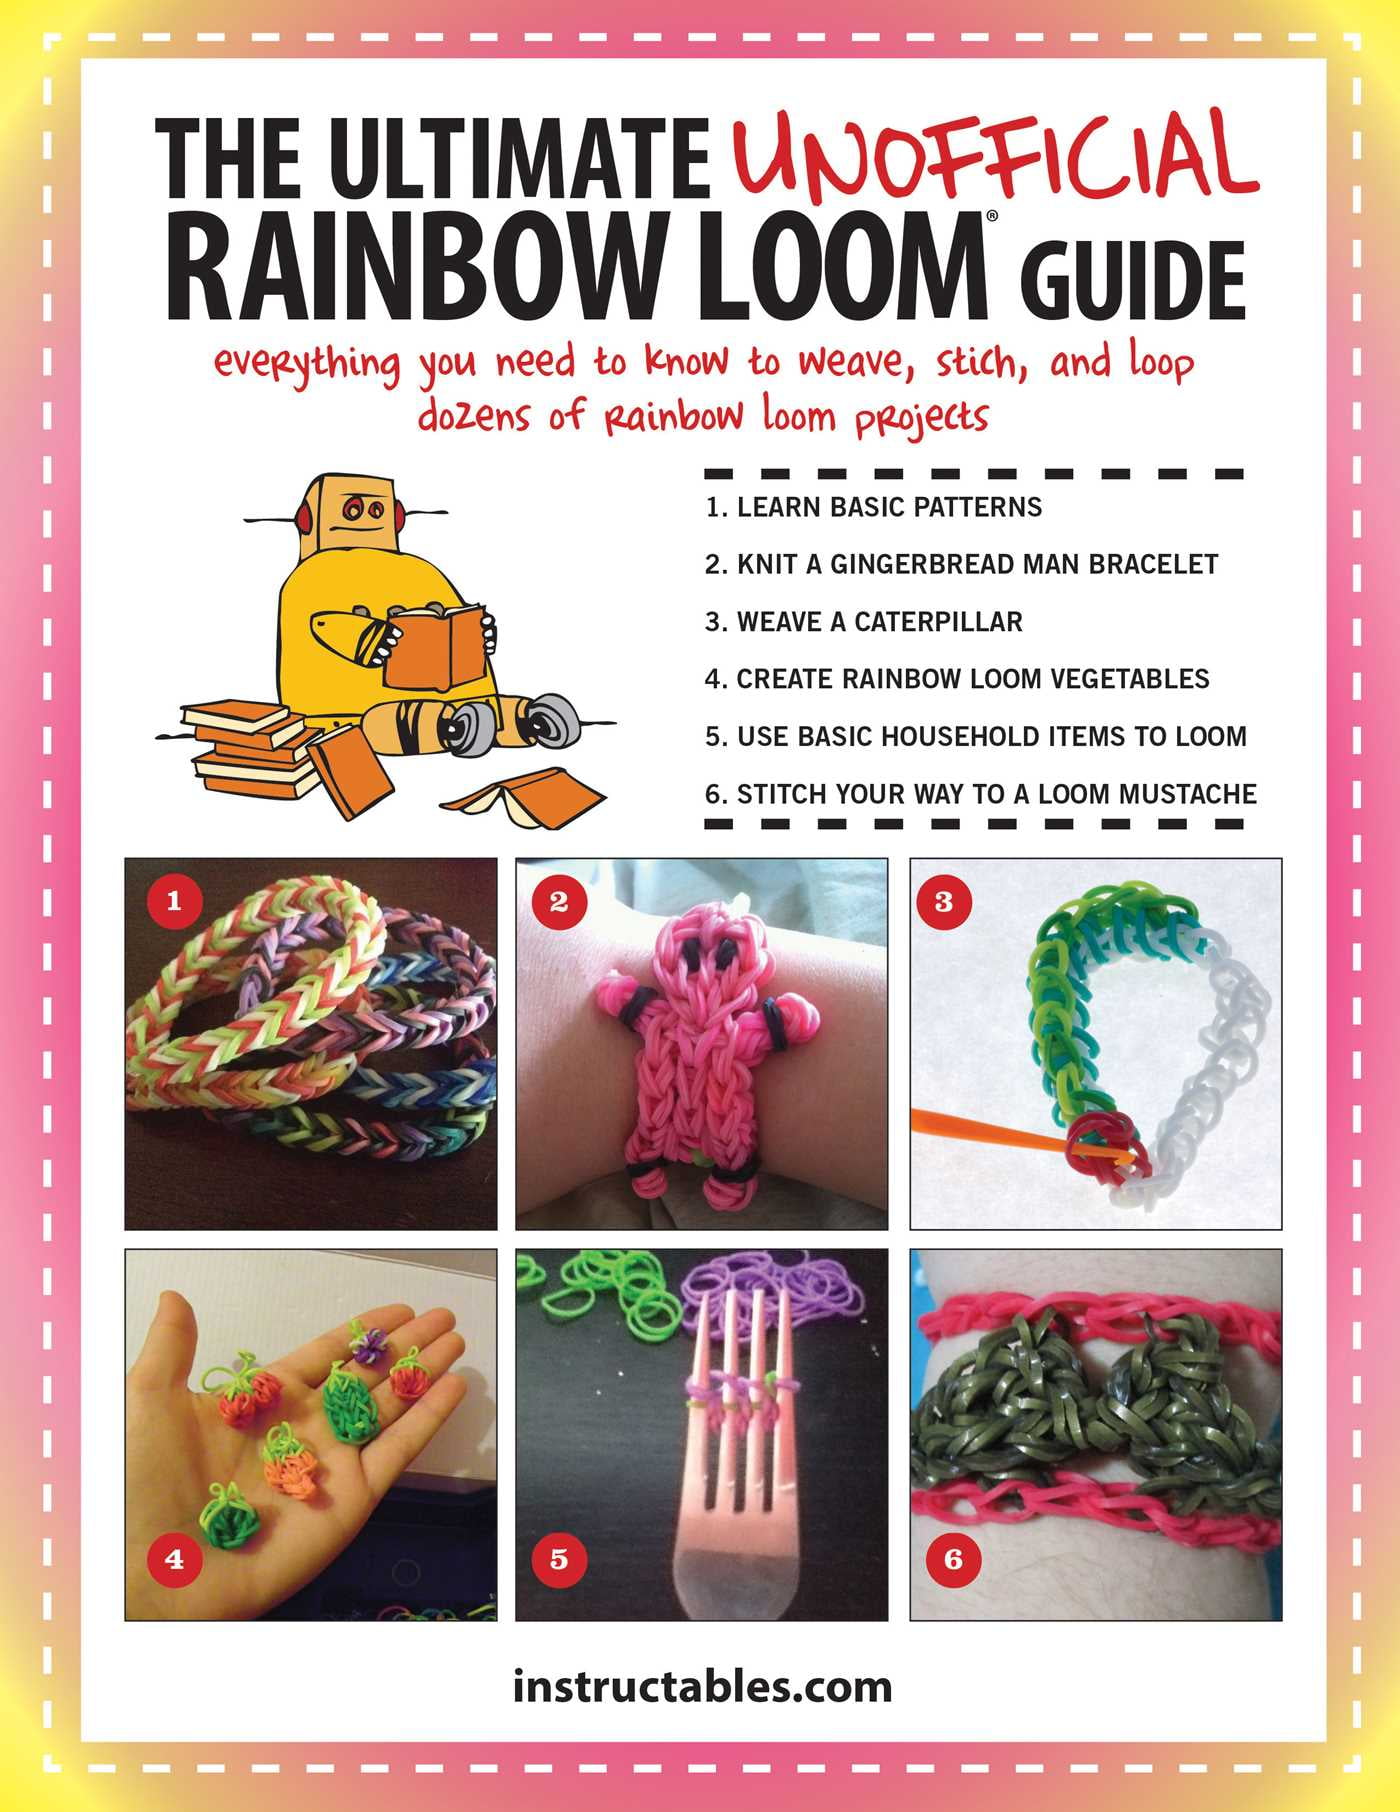 How to Organizing a Loom Band Set : 10 Steps - Instructables